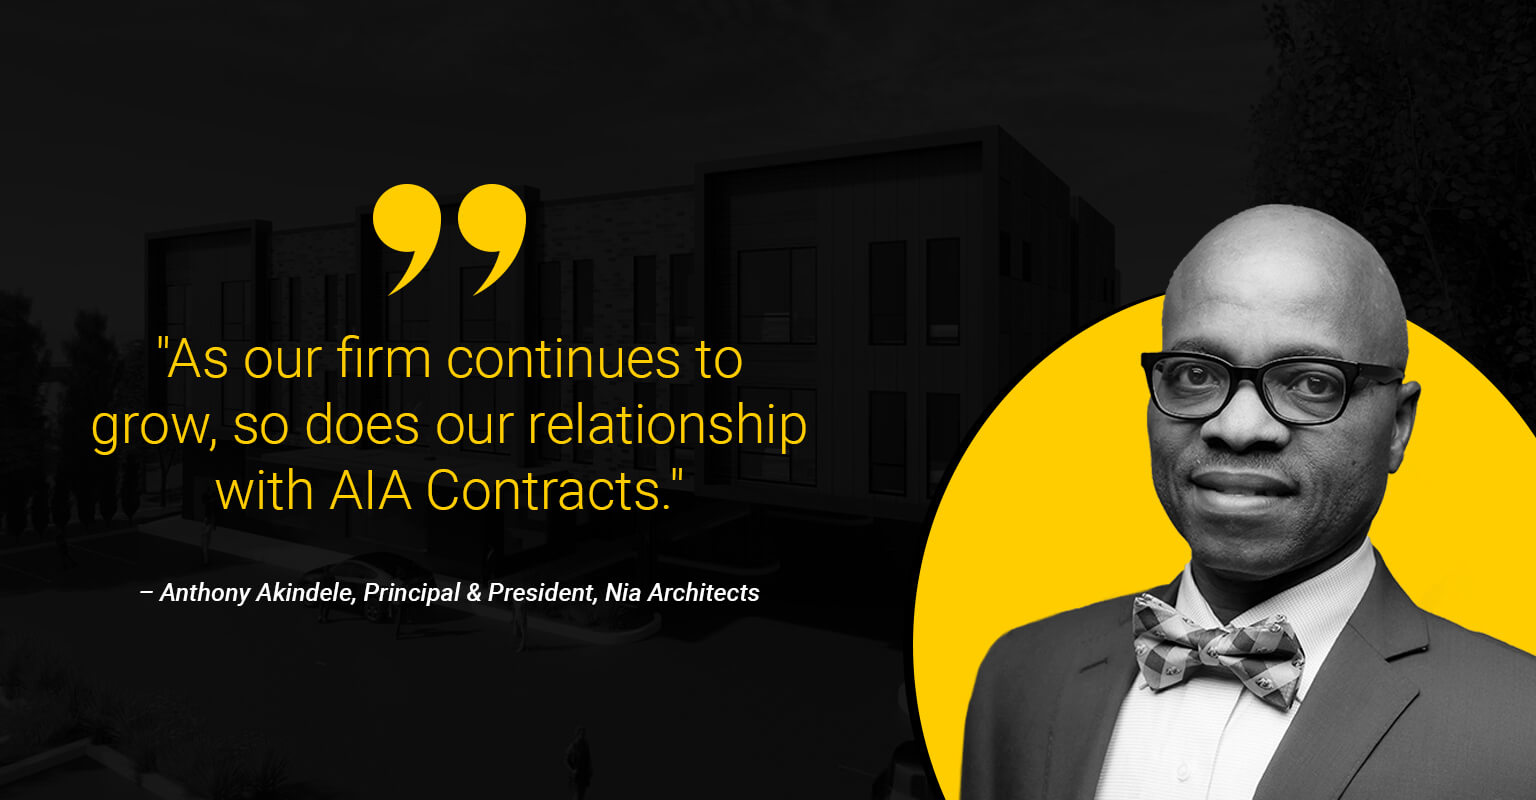 "As our firm continues to grow, so does our relationship with AIA Contracts." - Anthony Akindele, Principal & President, Nia Architects.